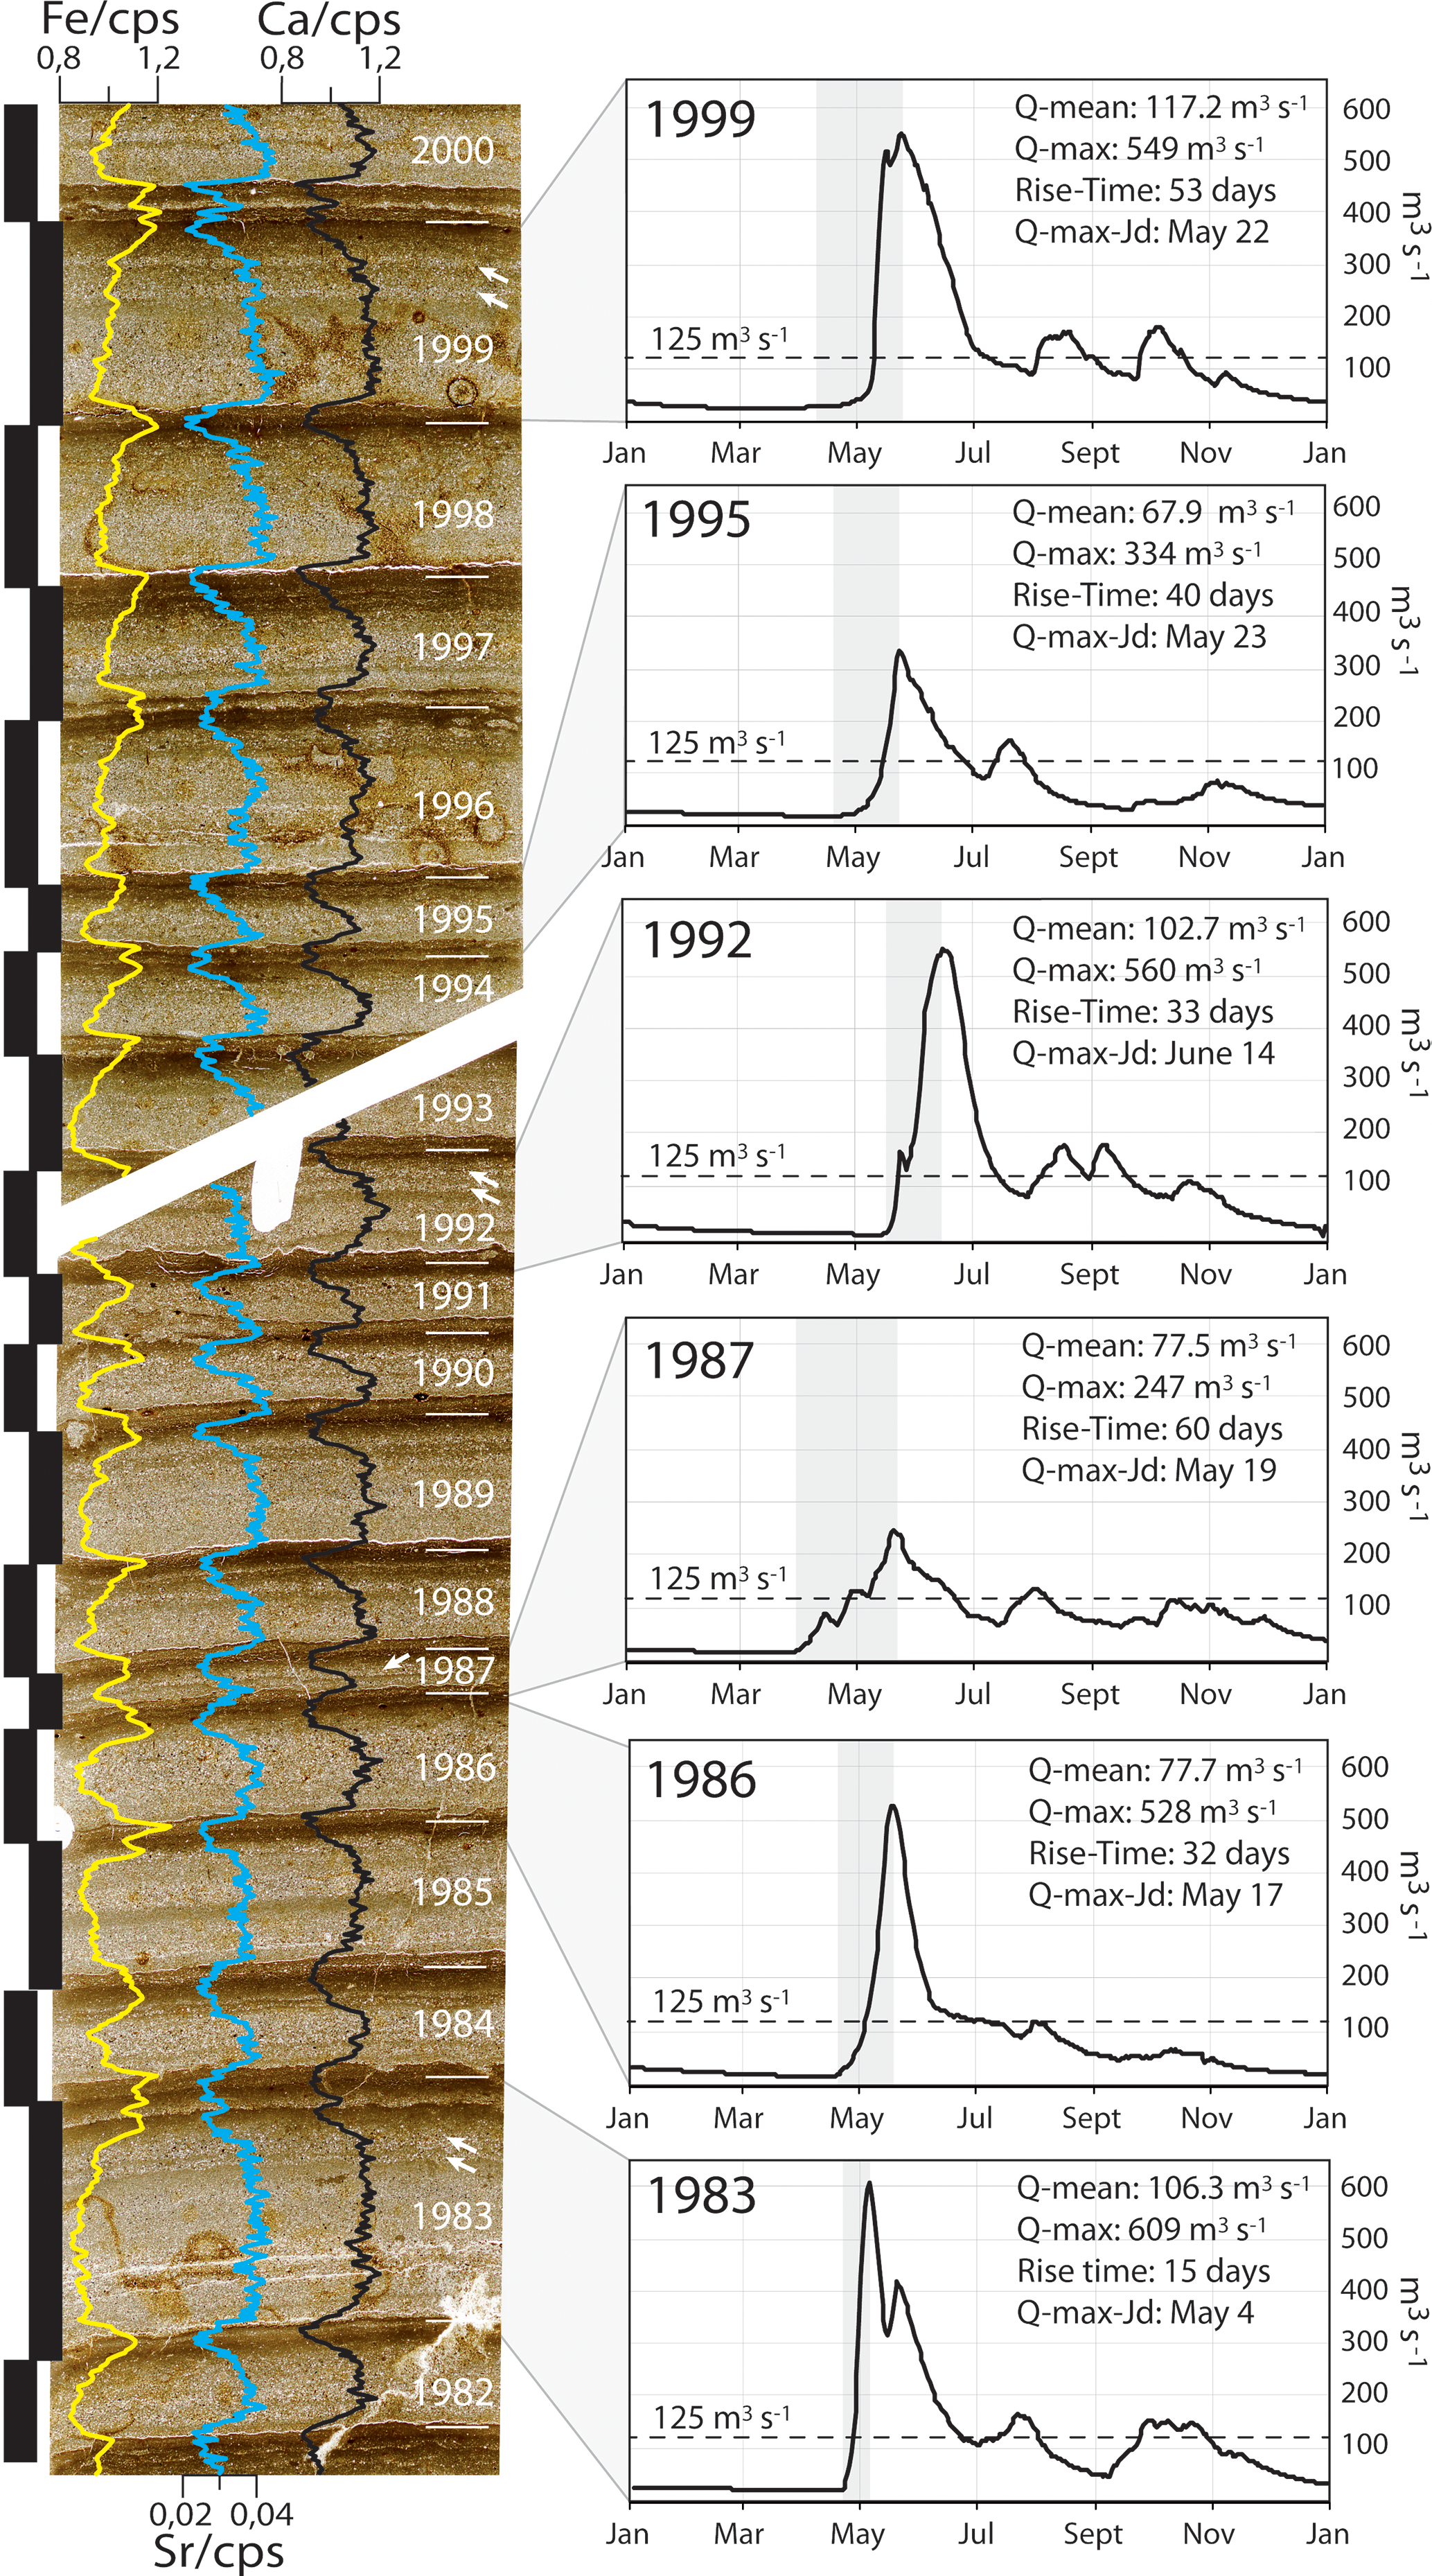 Cp Reconstructing Past Hydrology Of Eastern Canadian Boreal Catchments Using Clastic Varved Sediments And Hydro Climatic Modelling 160 Years Of Fluvial Inflows